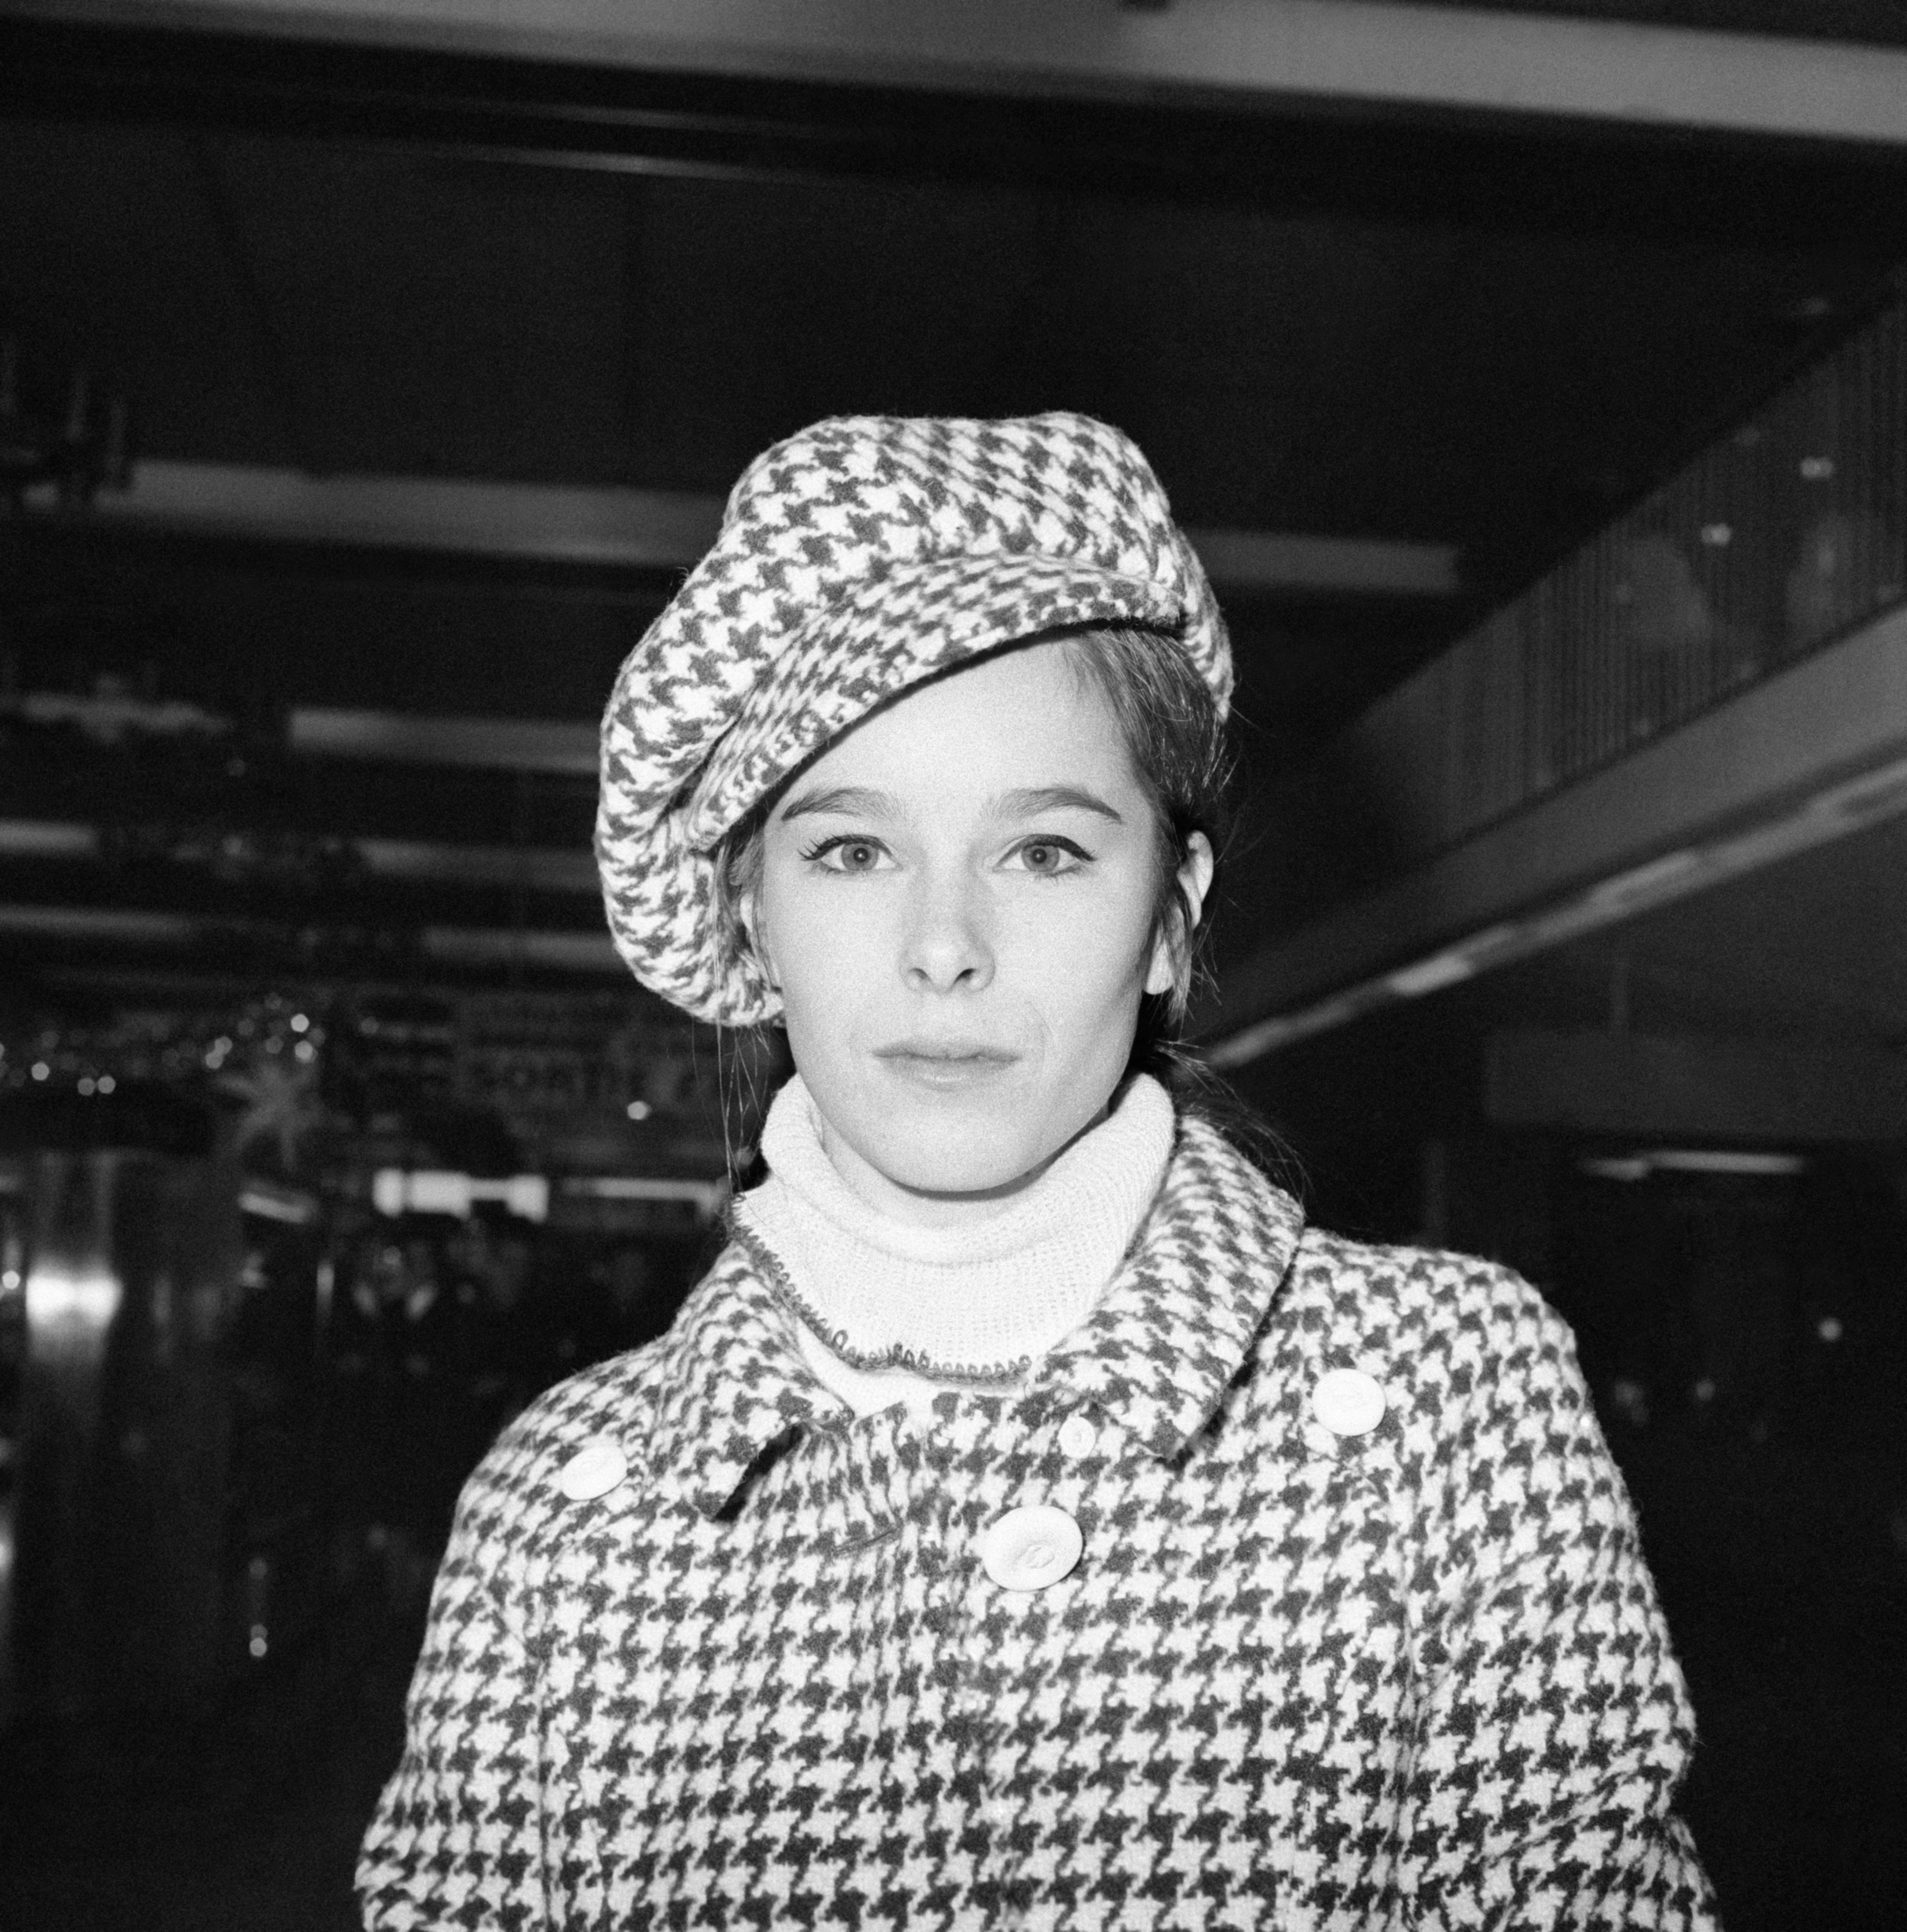 Géraldine Chaplin at Orly airport on December 8, 1965 in Orly, France. | Source: Getty Images